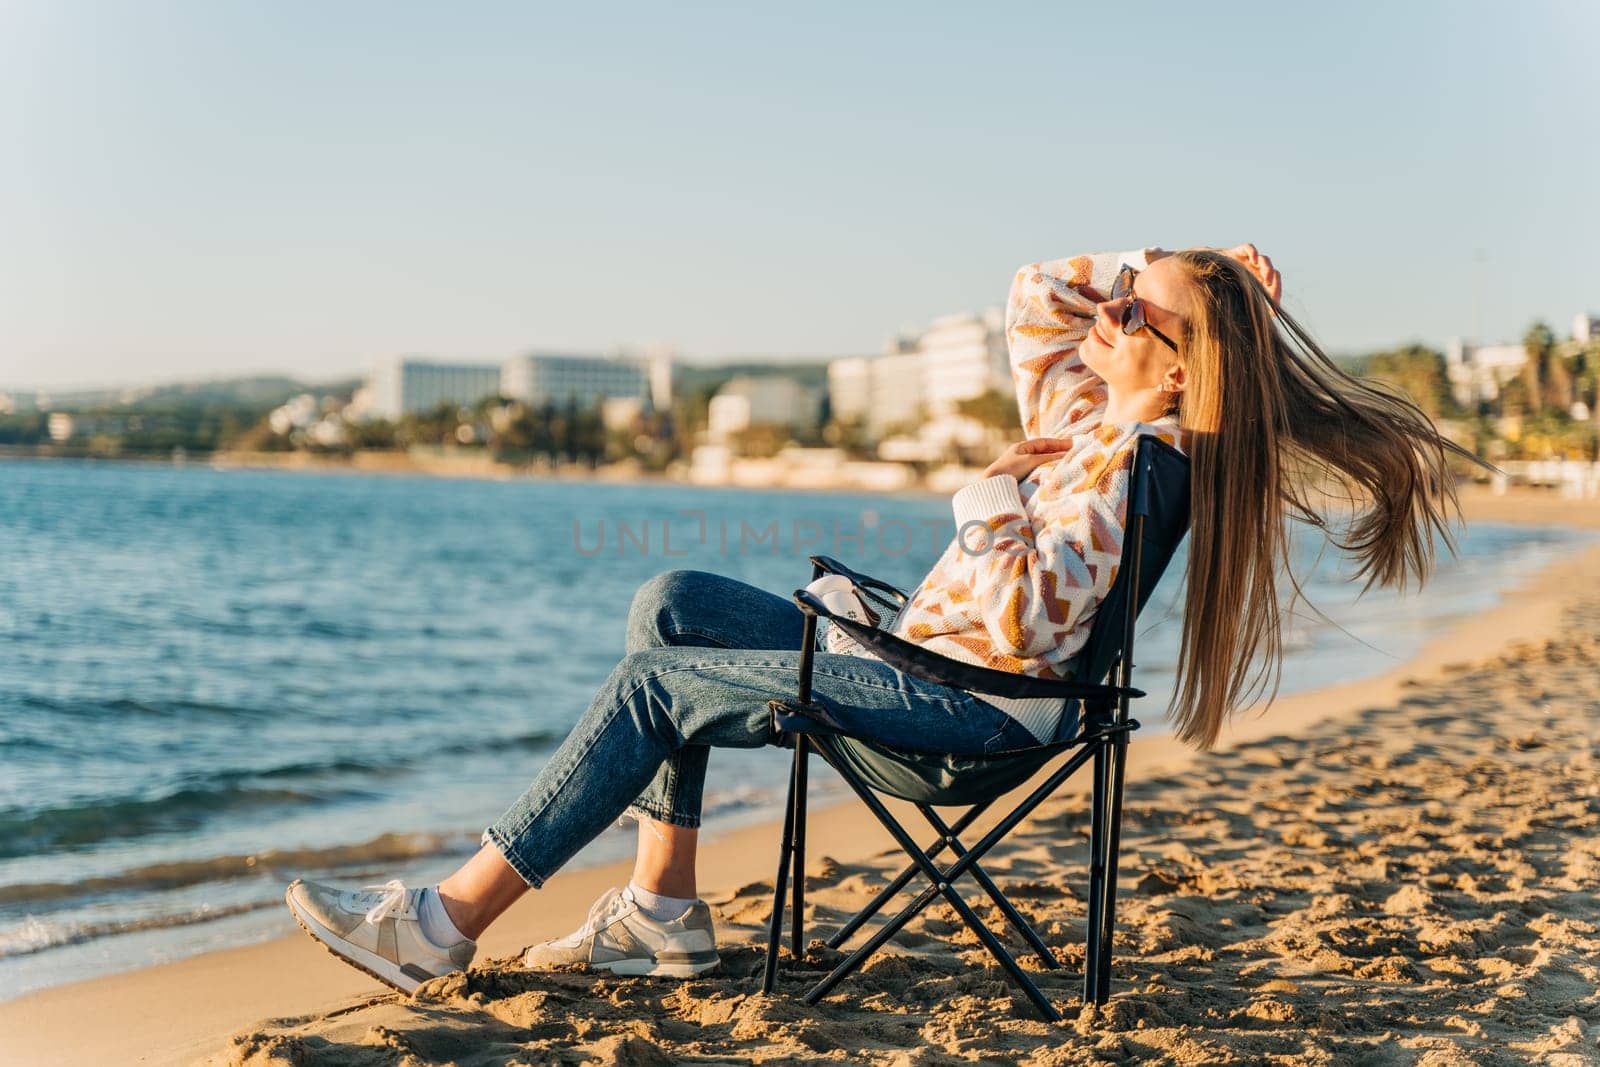 Beautiful young girl in cozy sweater and sunglasses relaxing while sitting on foldable chair on winter coast sand. Woman enjoying autumn ocean fall sunset view while wind blowing her hair.